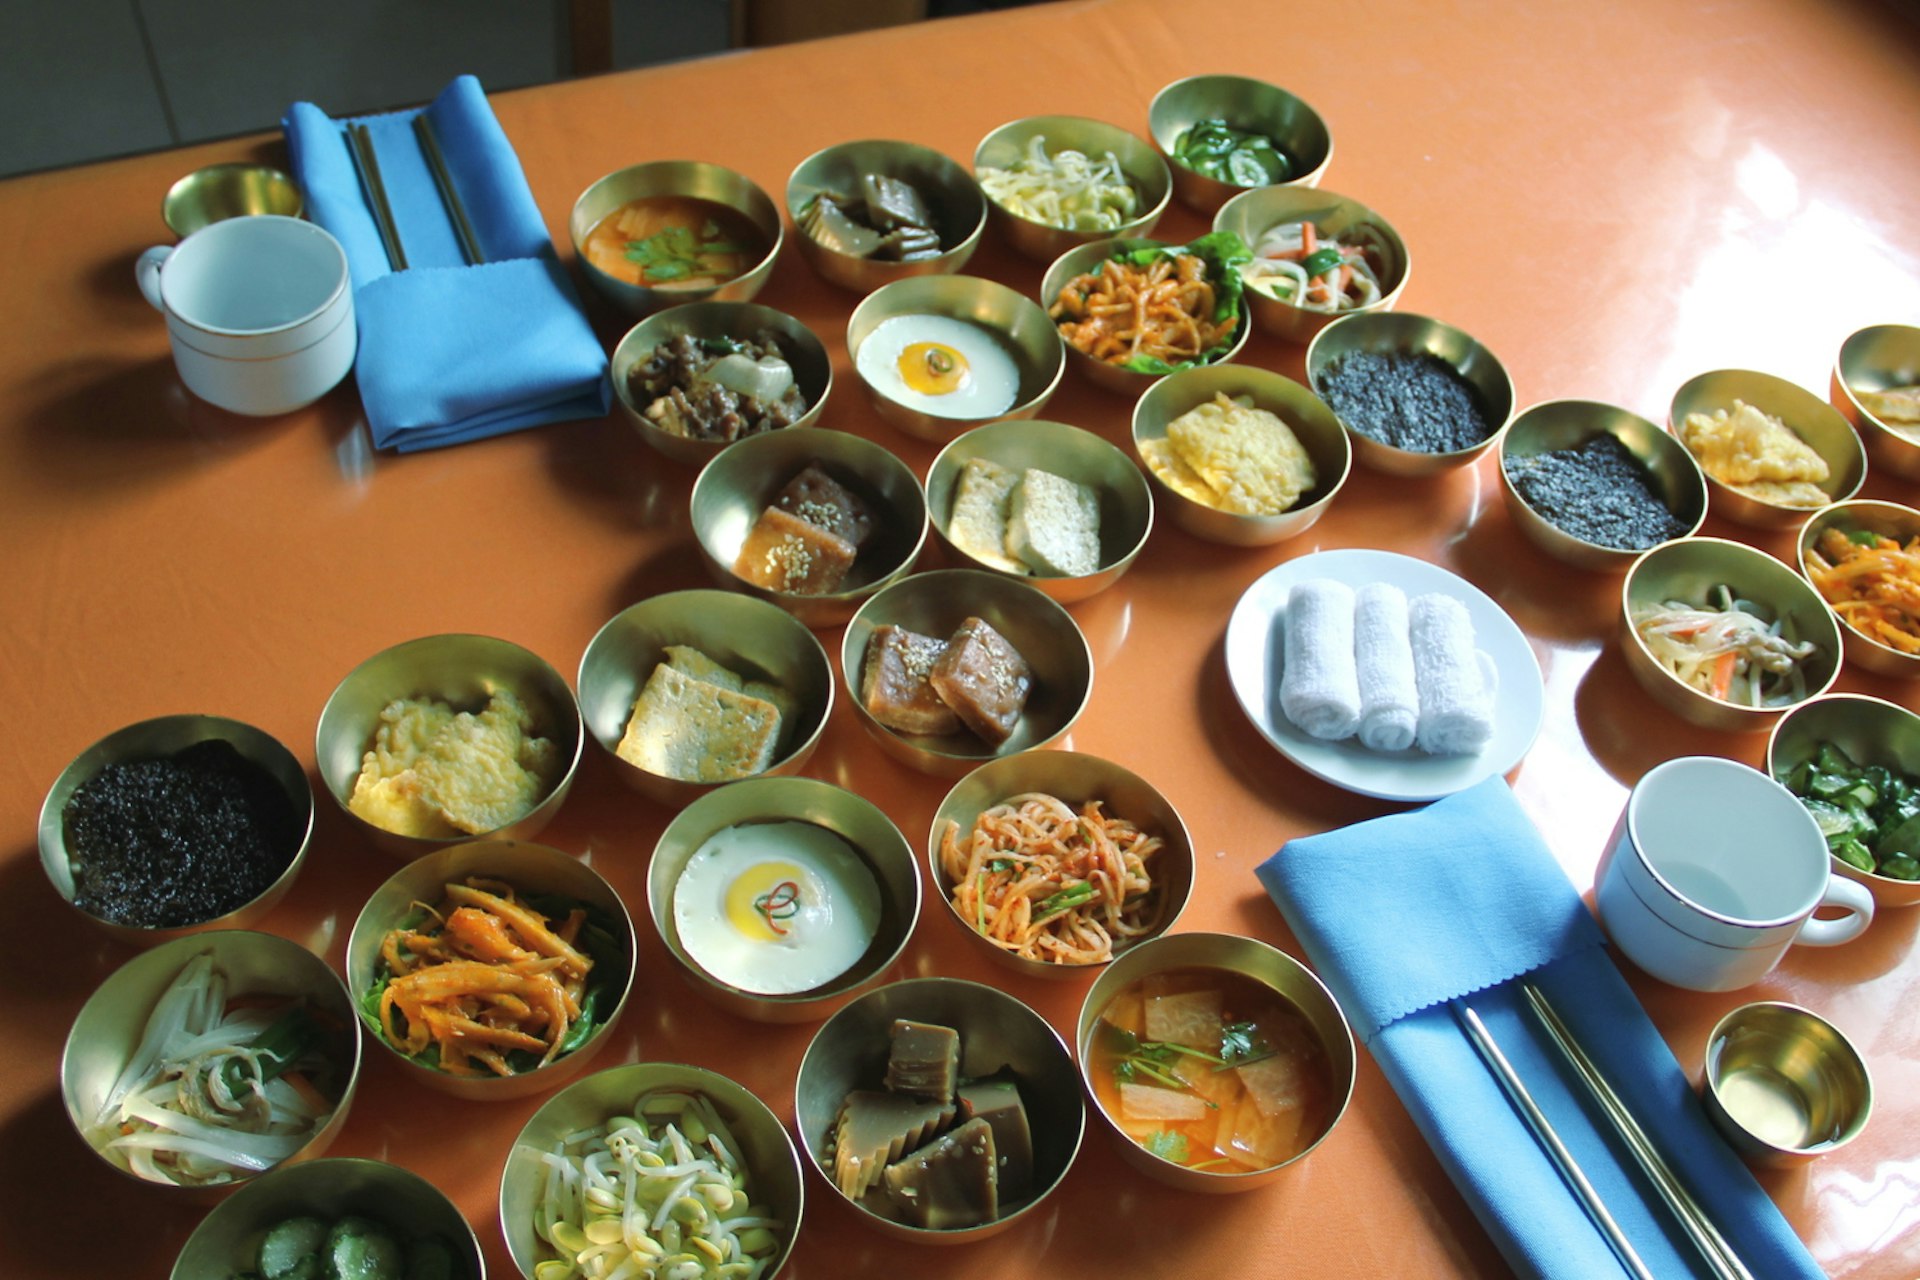 A typical tourist's lunch in North Korea includes small dishes like kimchi, tofu and egg. Image by Lonely Planet 